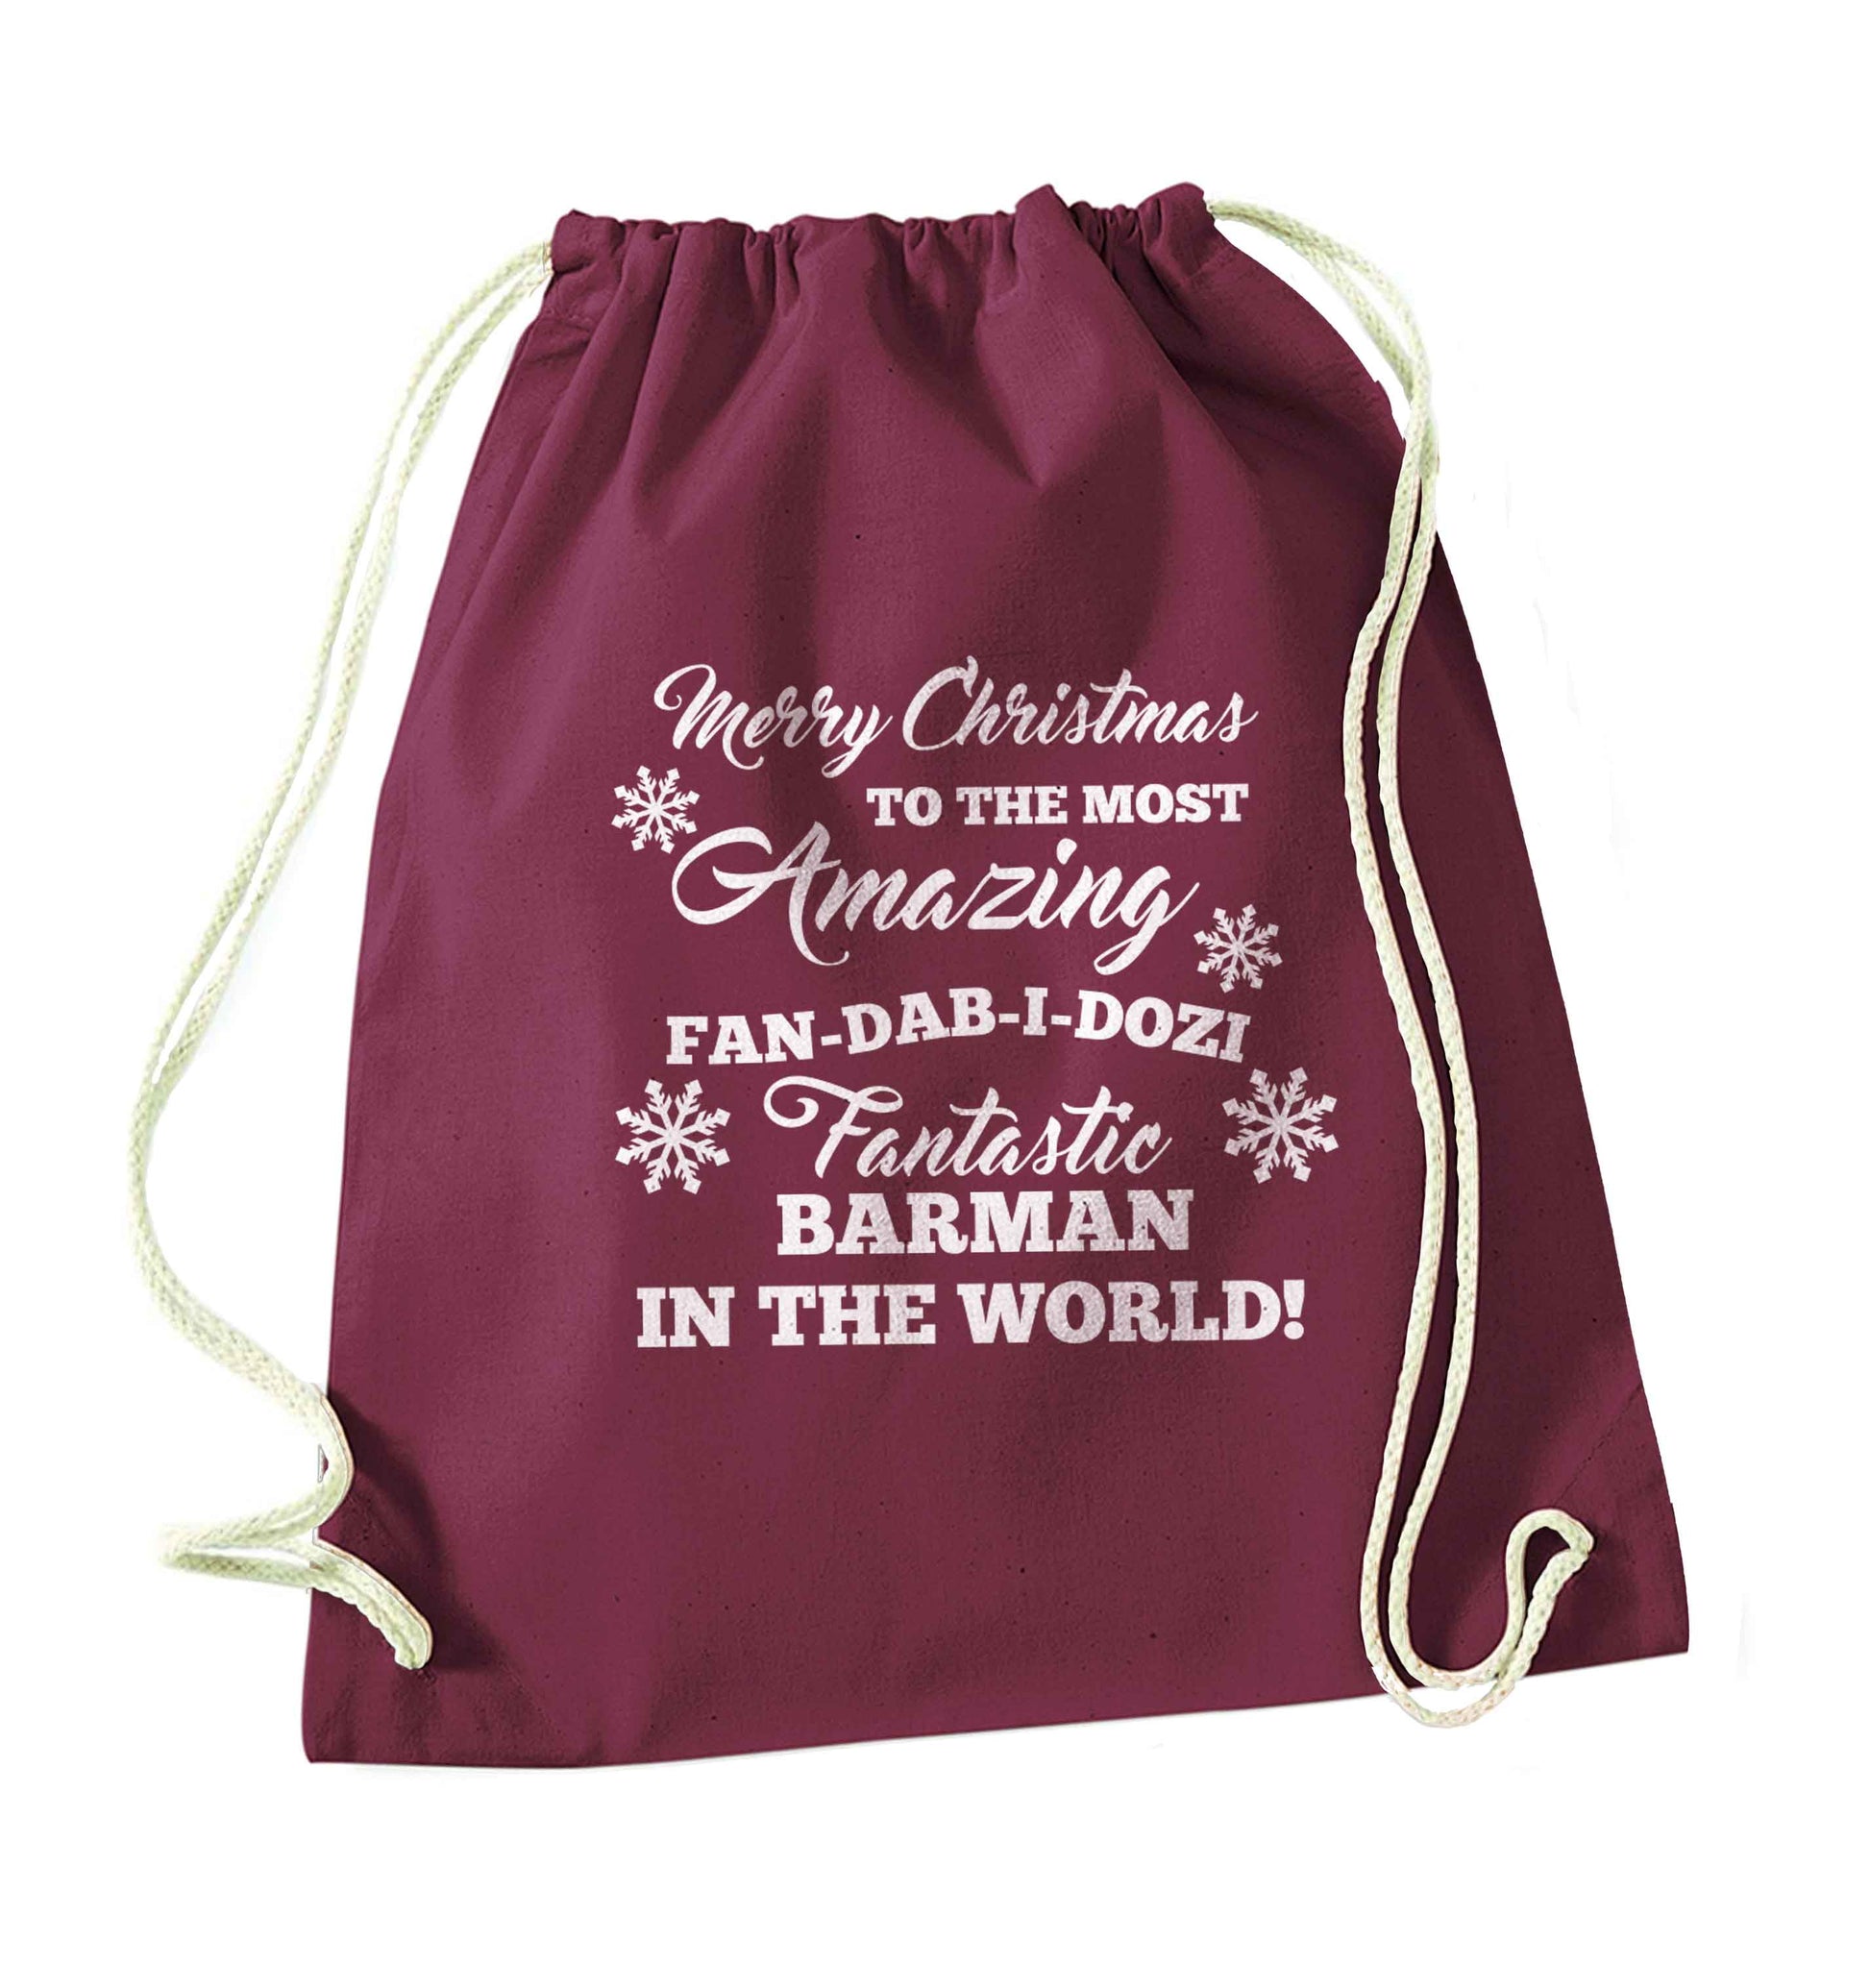 Merry Christmas to the most amazing barman in the world! maroon drawstring bag